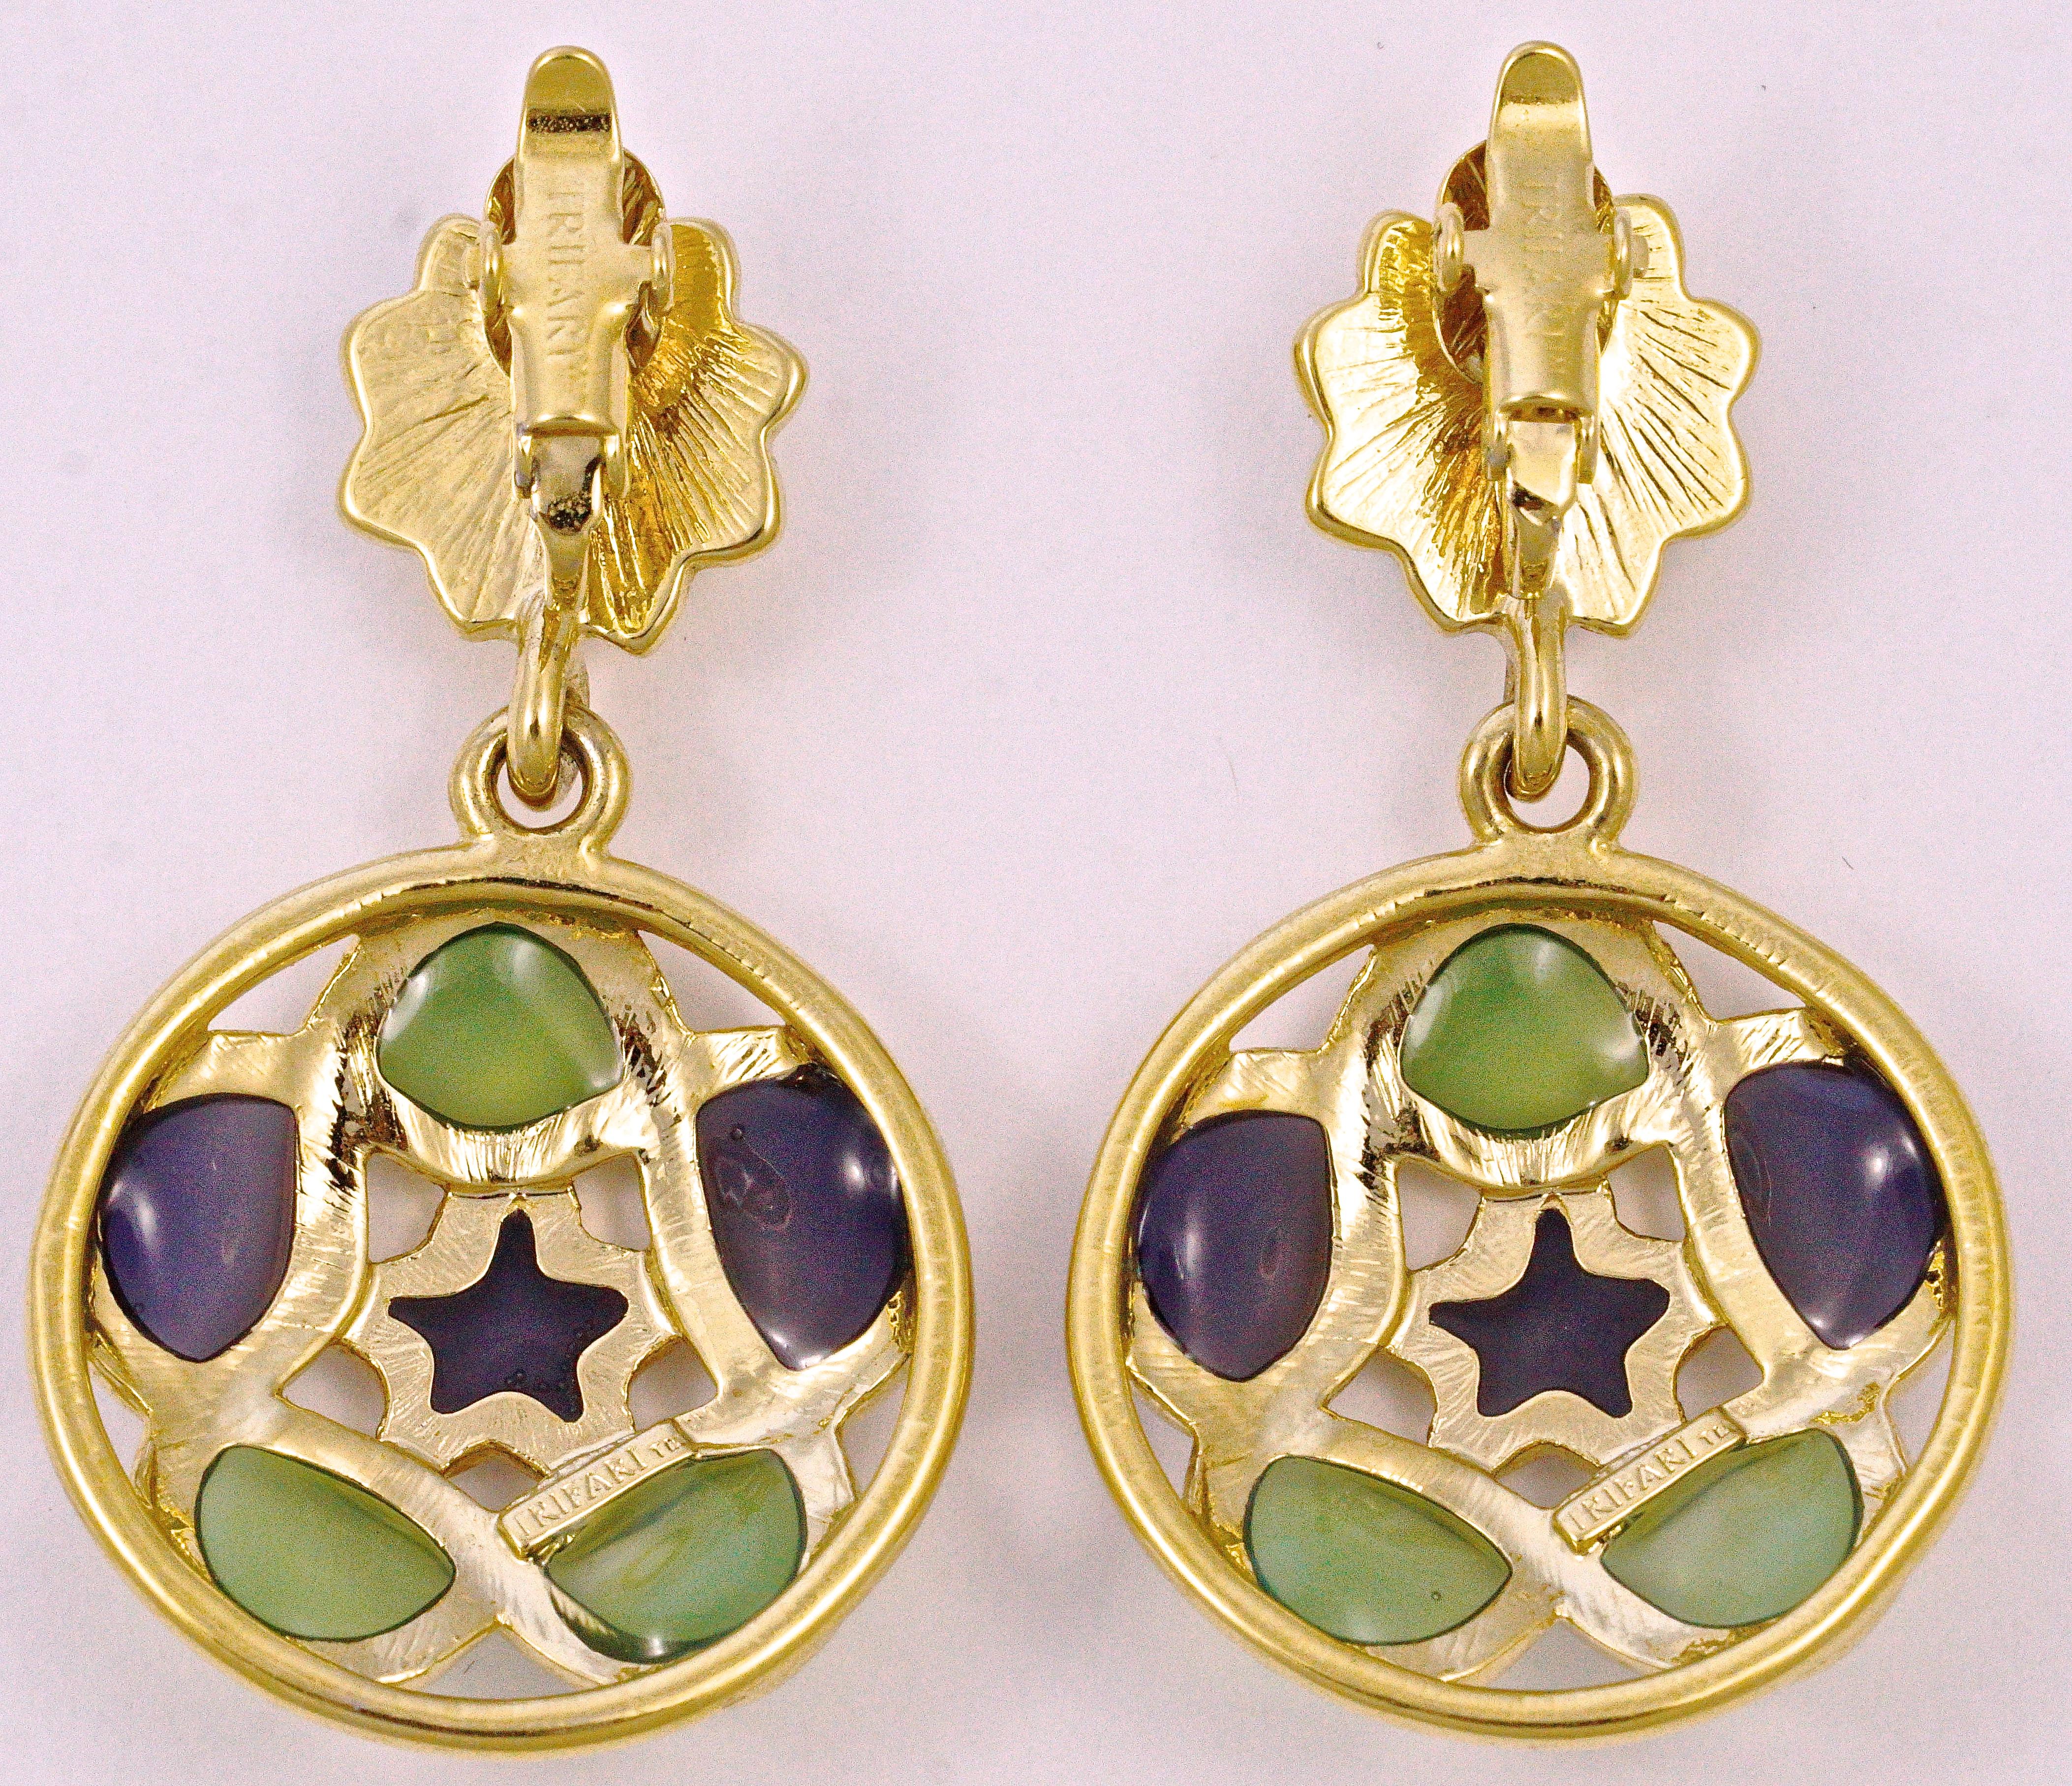 Lovely Trifari 1980s gold plated clip on earrings, featuring green and lilac glass surrounding a star, dropping from a sun face design top. Measuring diameter 2.8cm / 1.1 inches. 

These unusual quality vintage Trifari earrings are fun and